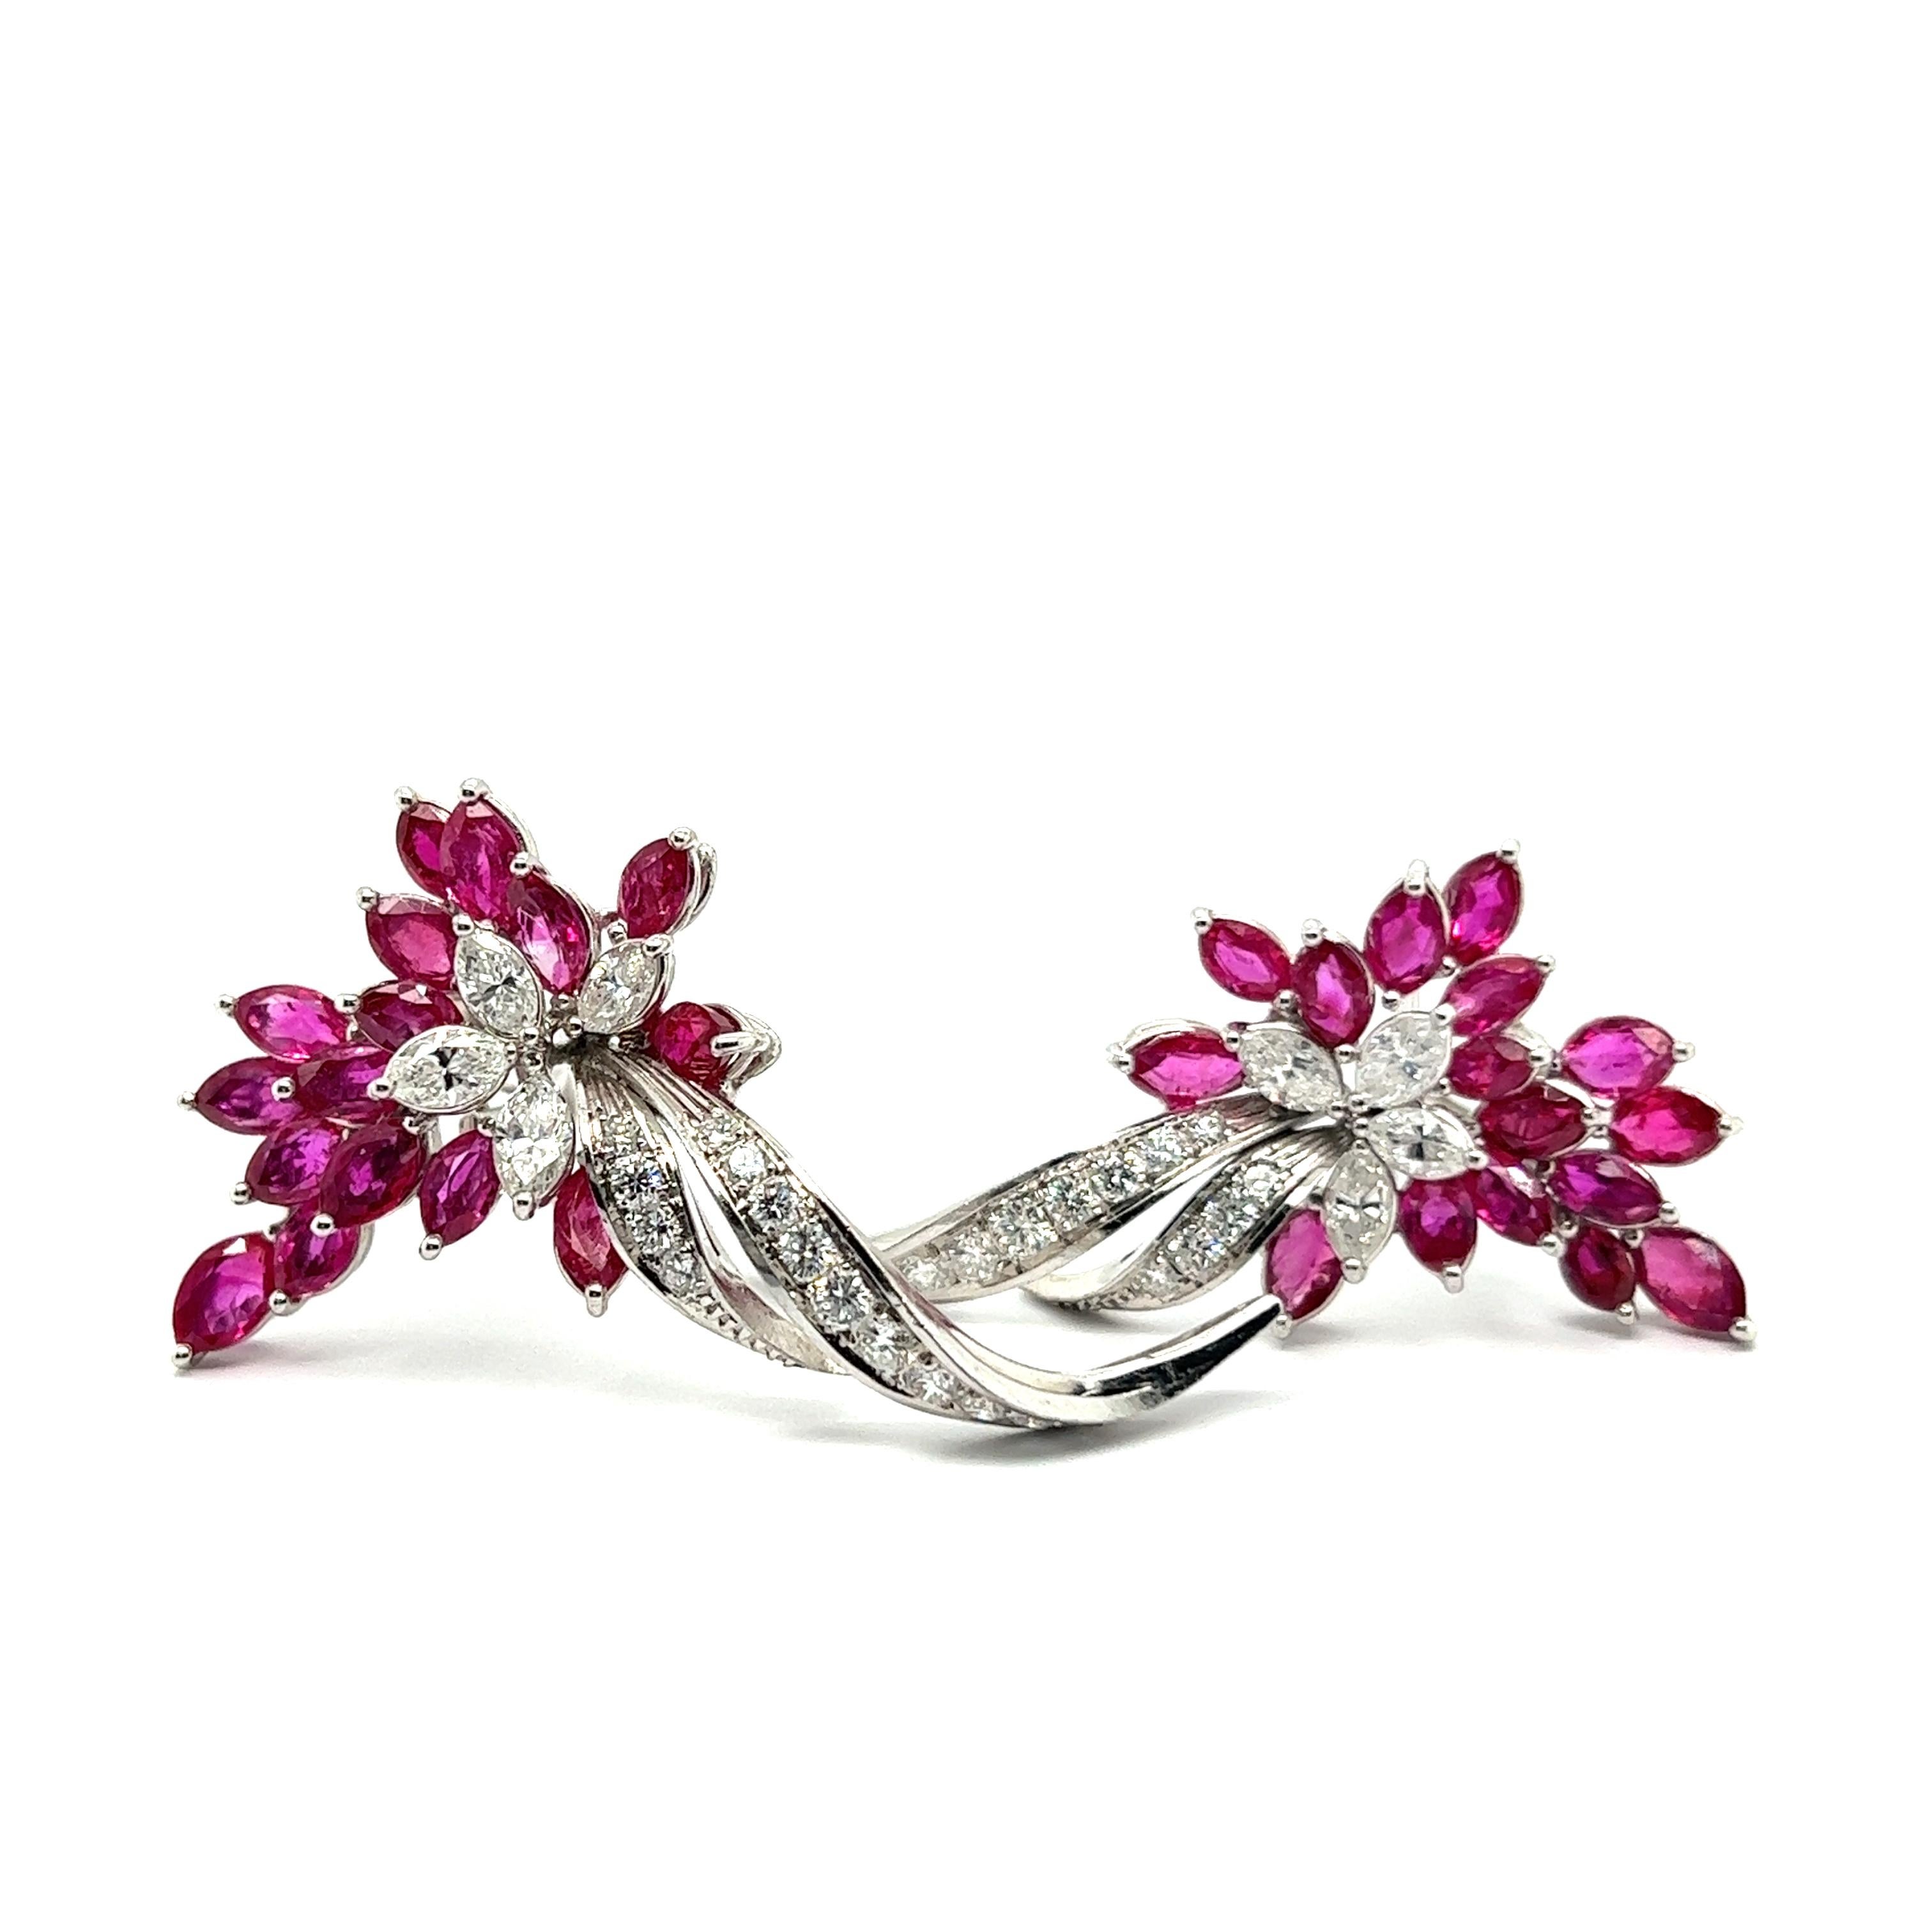 Introducing our exquisite rubies and diamonds clip-on earrings in 18 Karat white gold—an embodiment of jewelry artistry.

Seizing the spotlight, 32 exceptional marquise-cut rubies, totaling 7.00 carats that echo the grace of tropical blossoms. Their